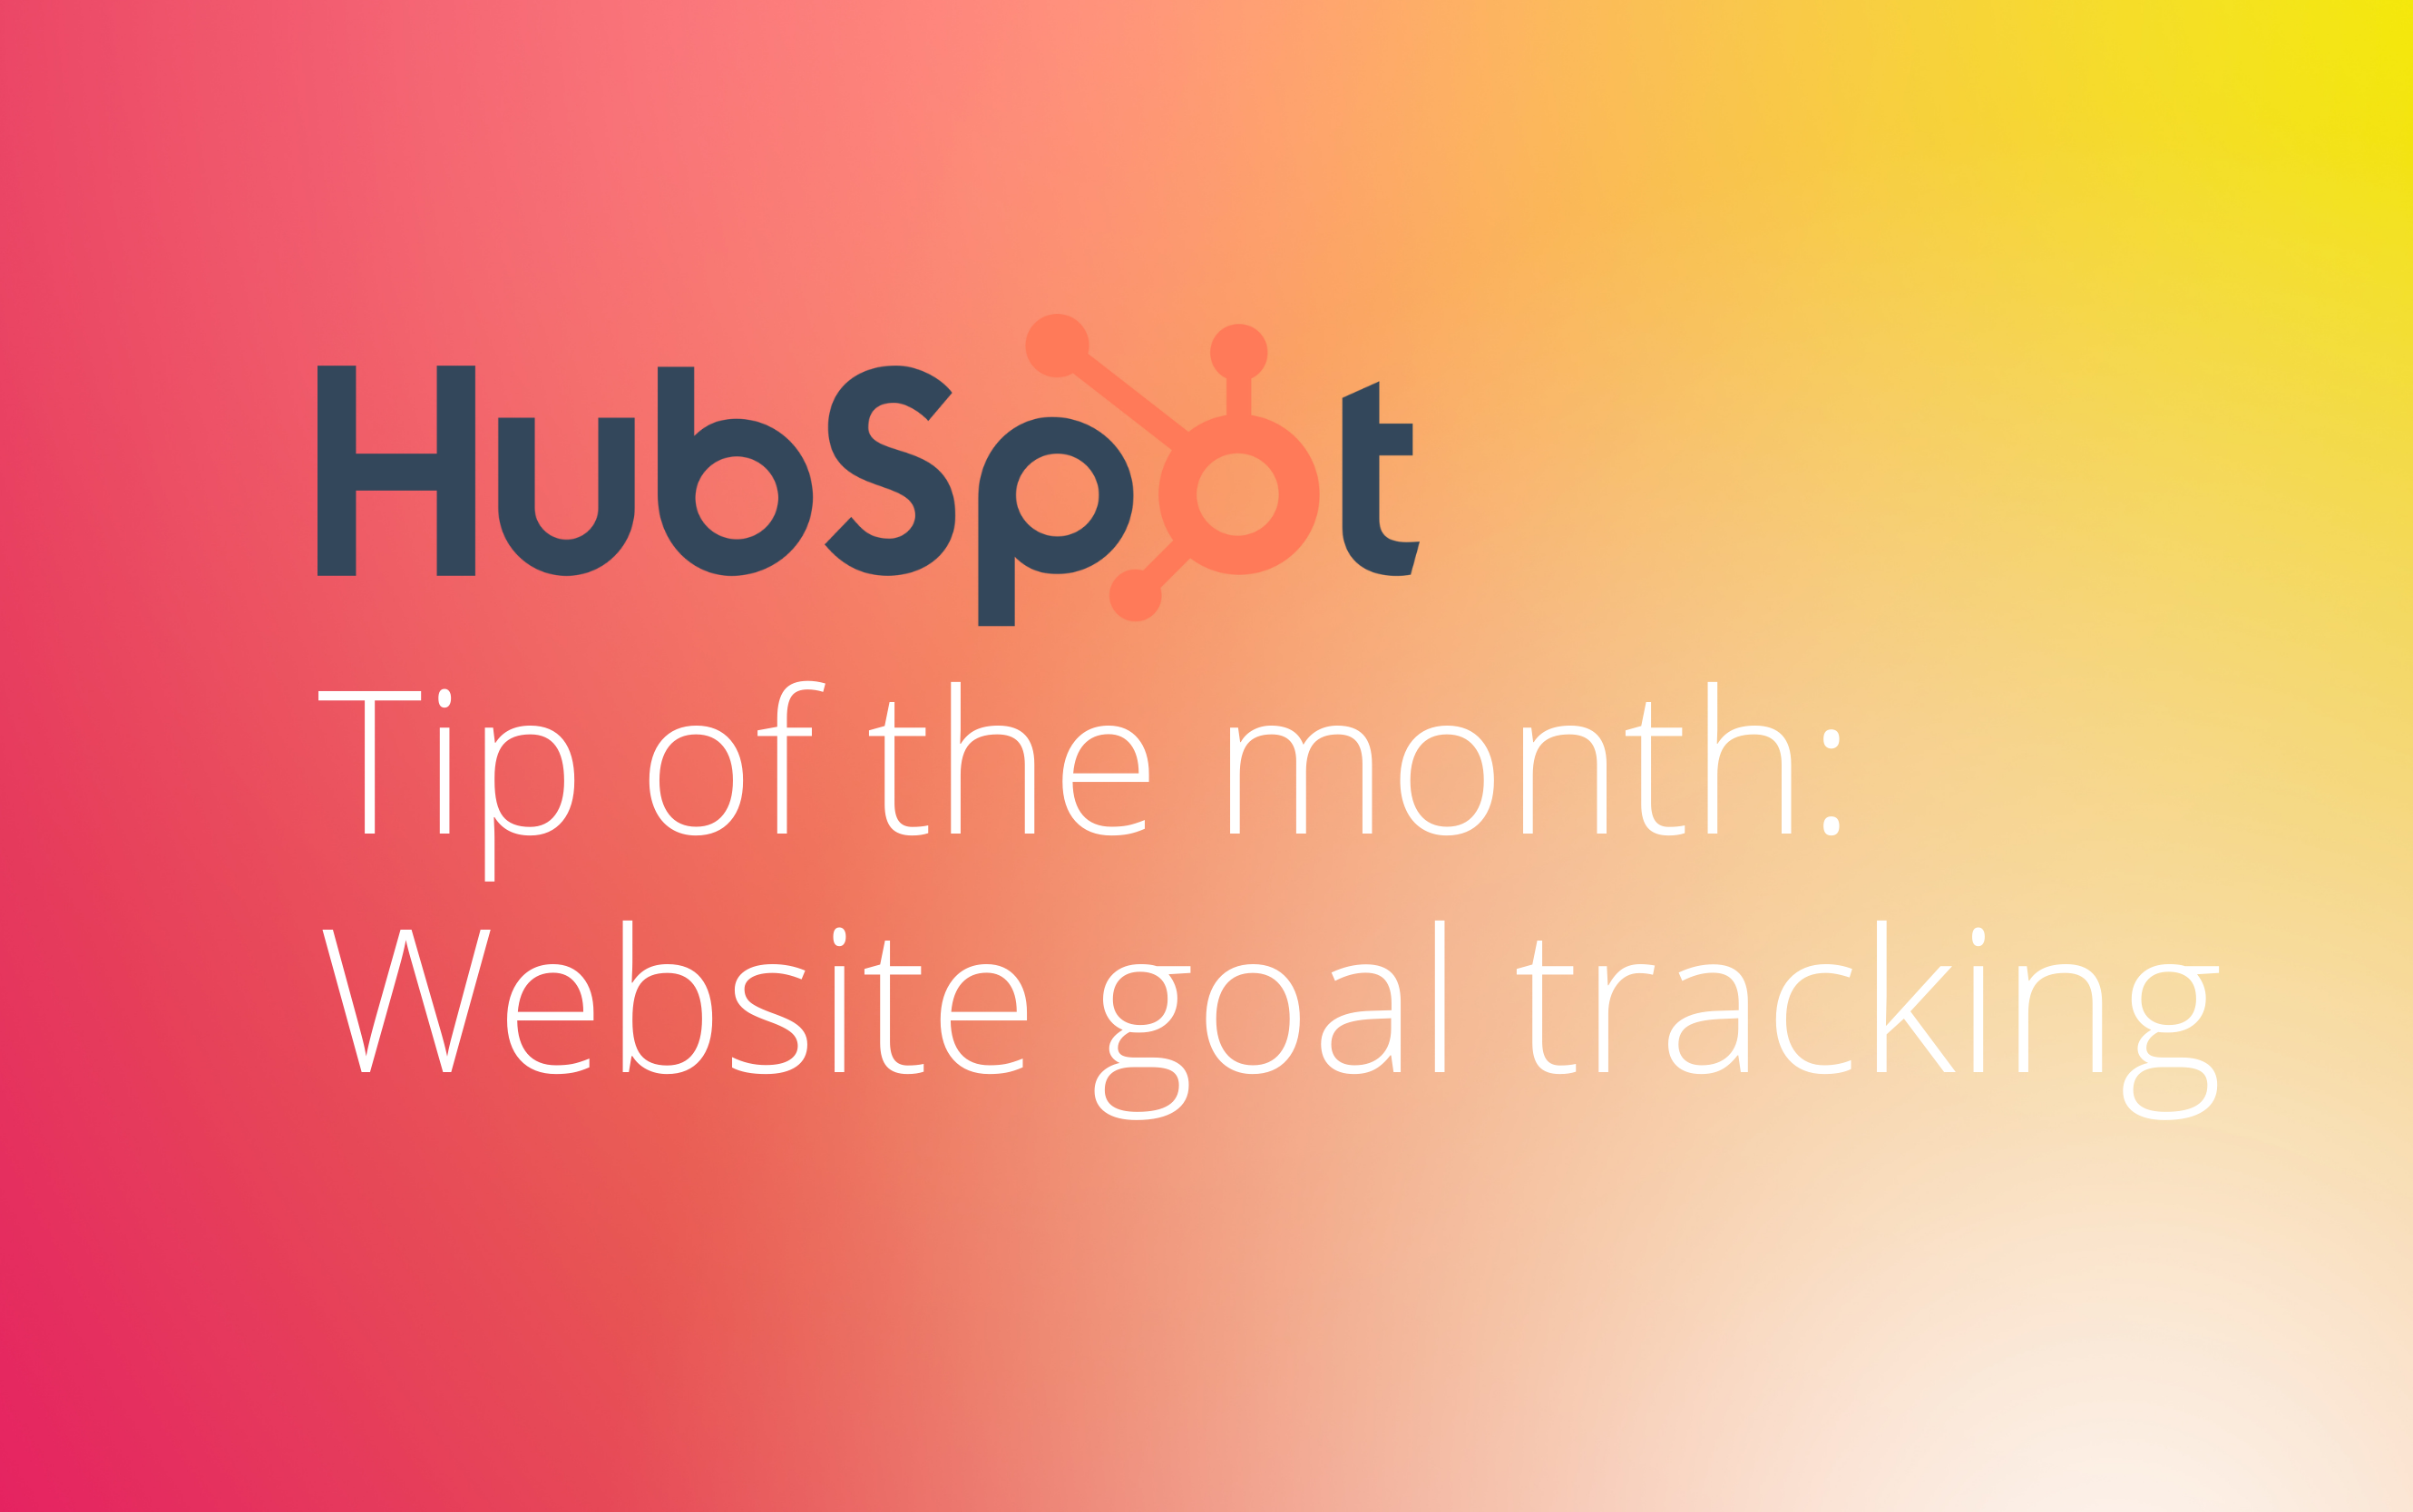 HubSpot Tip of the Month: Website goal tracking